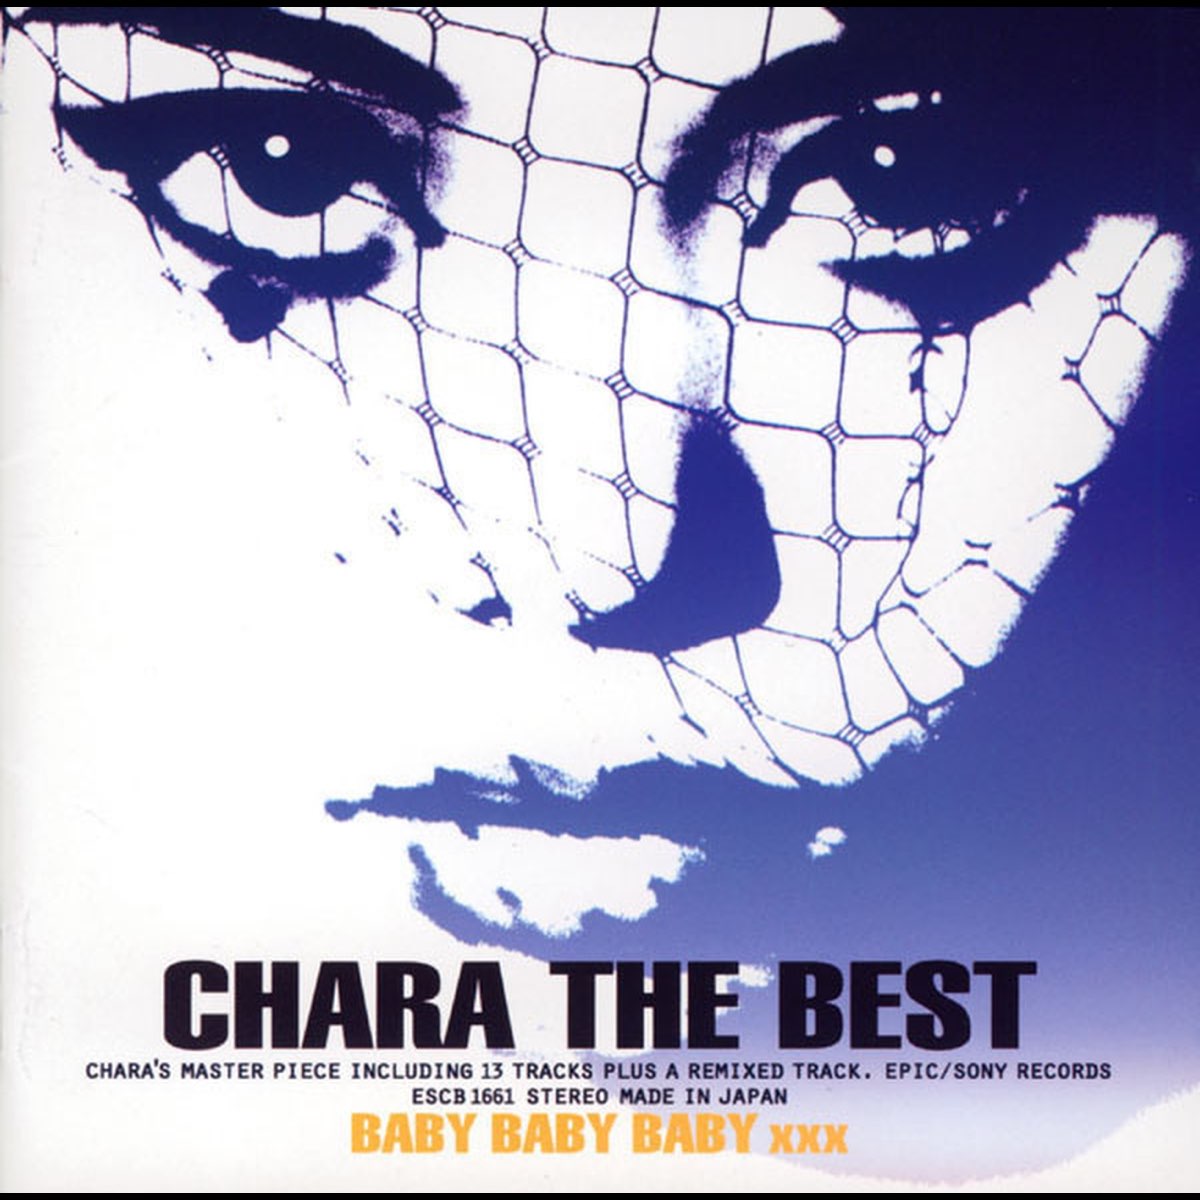 Babyxxx - CHARA THE BEST BABY BABY BABY xxx by Chara on Apple Music